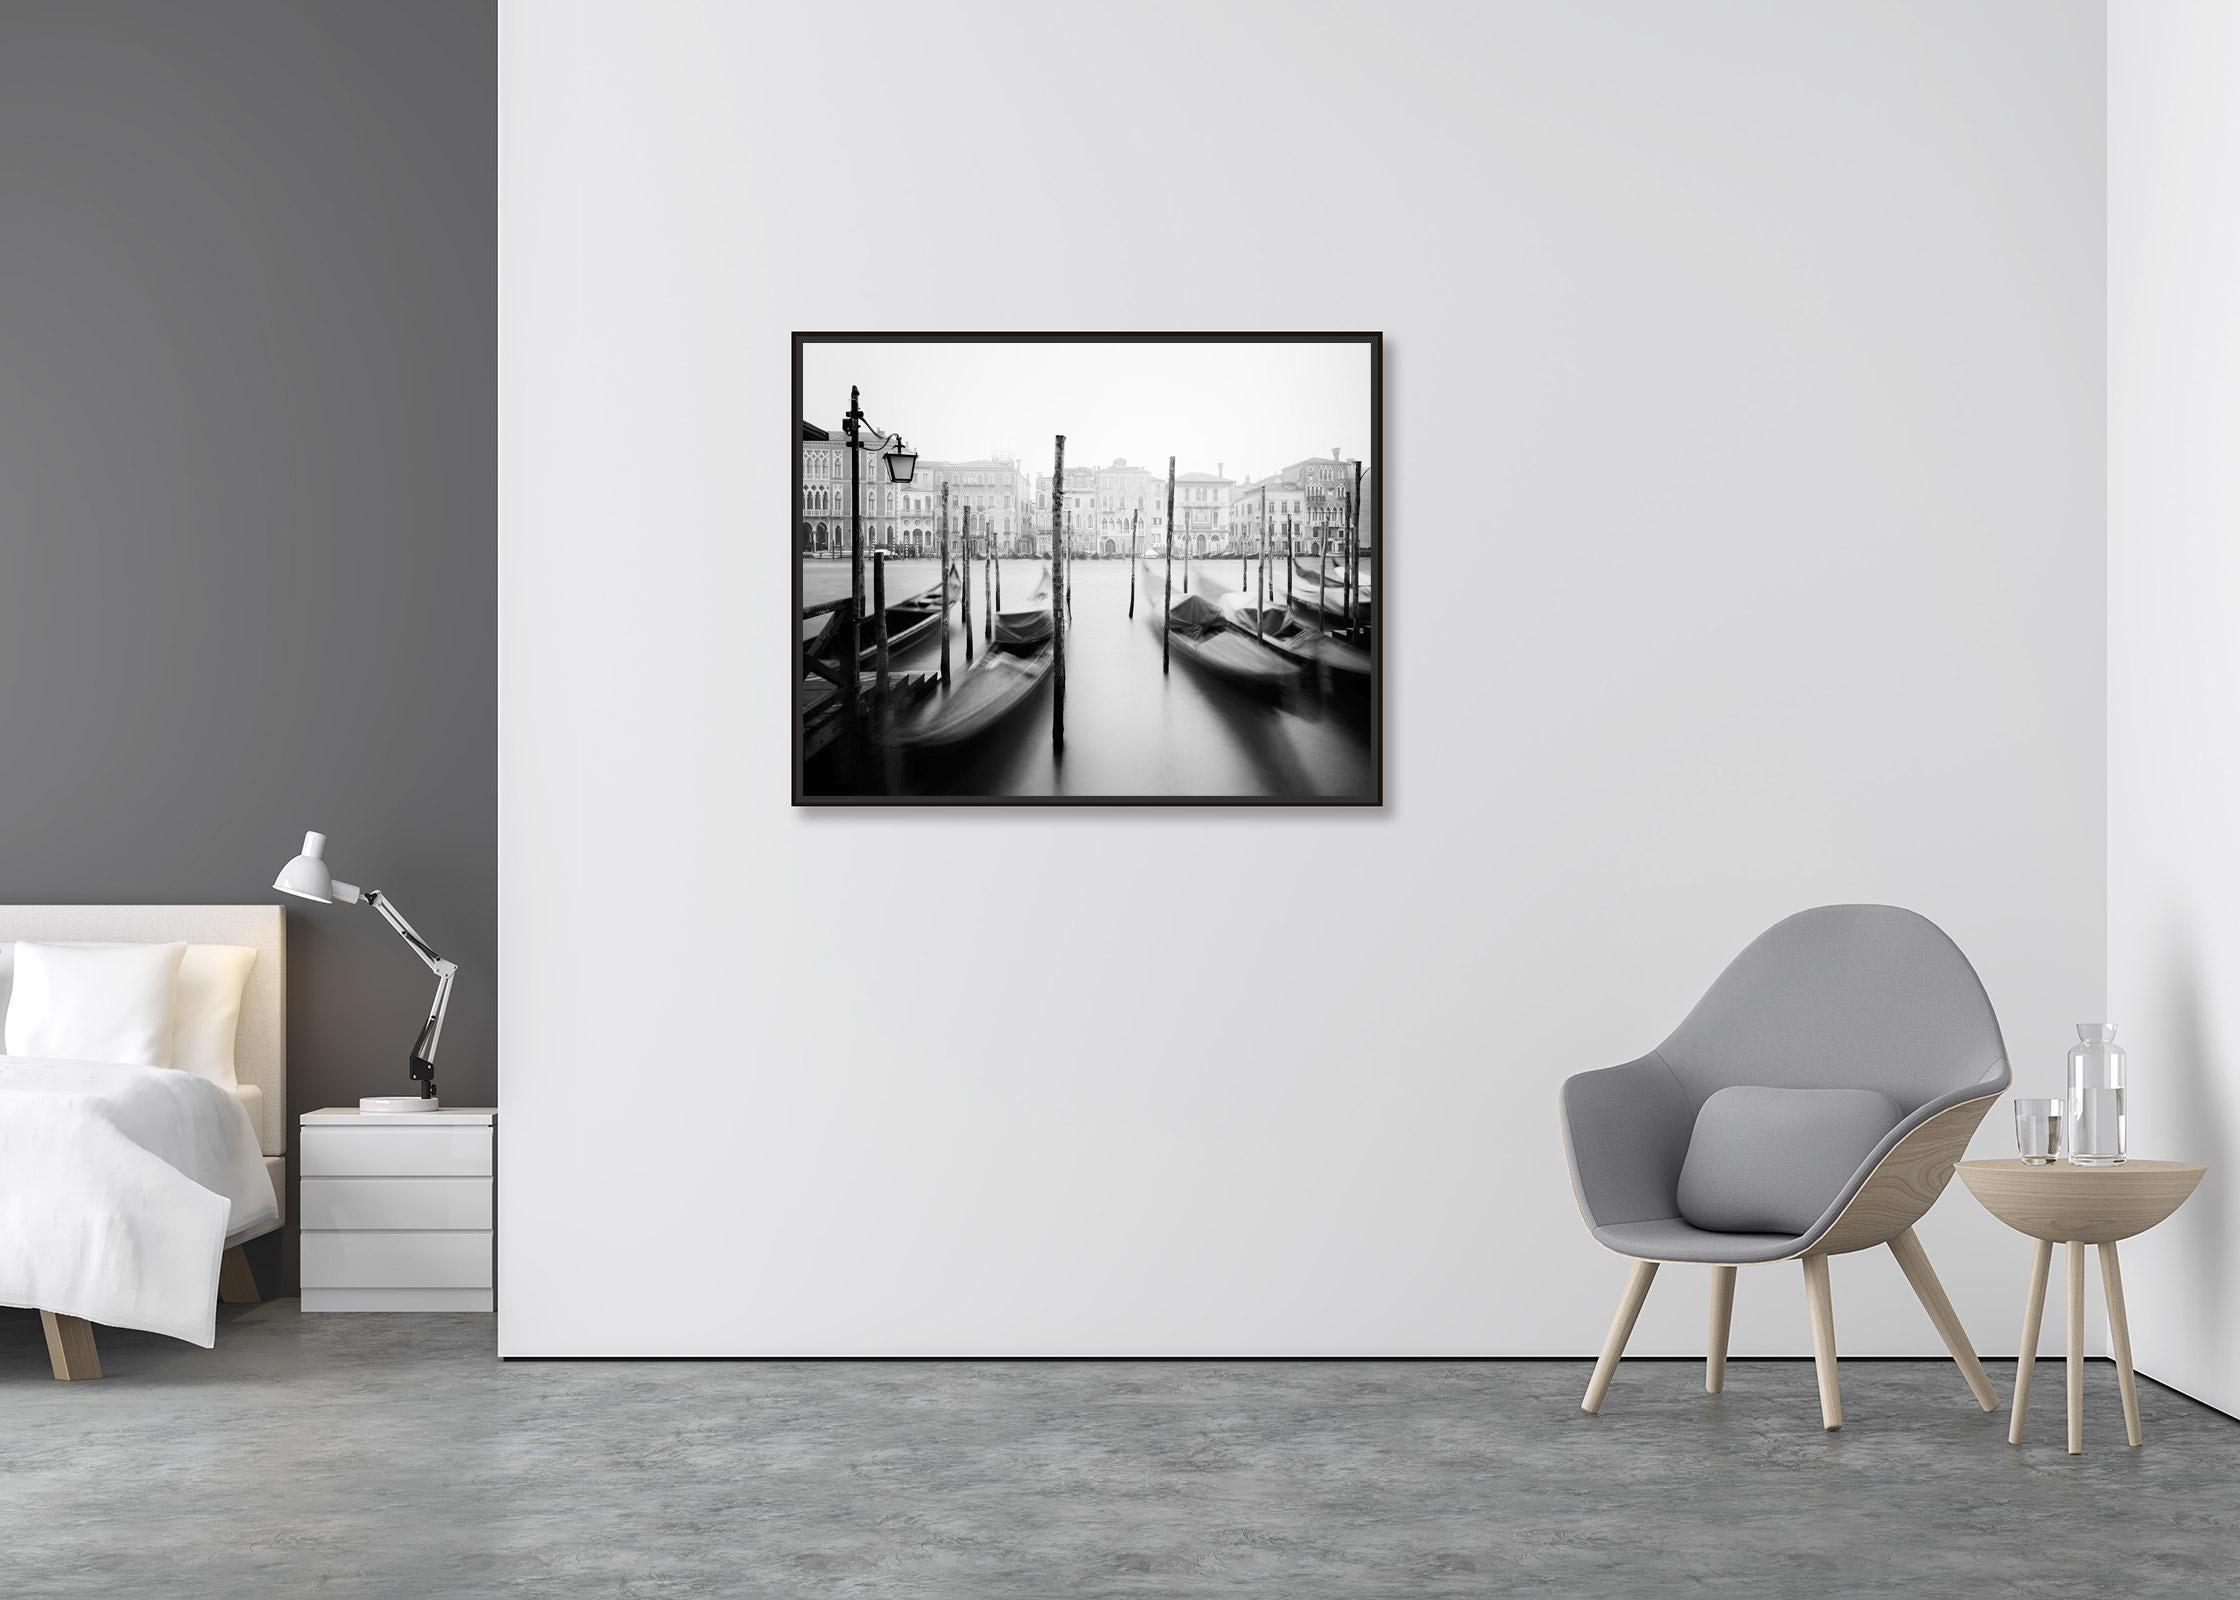 Gondola, Canal Grande, Venice, black and white fine art cityscape photography - Contemporary Photograph by Gerald Berghammer